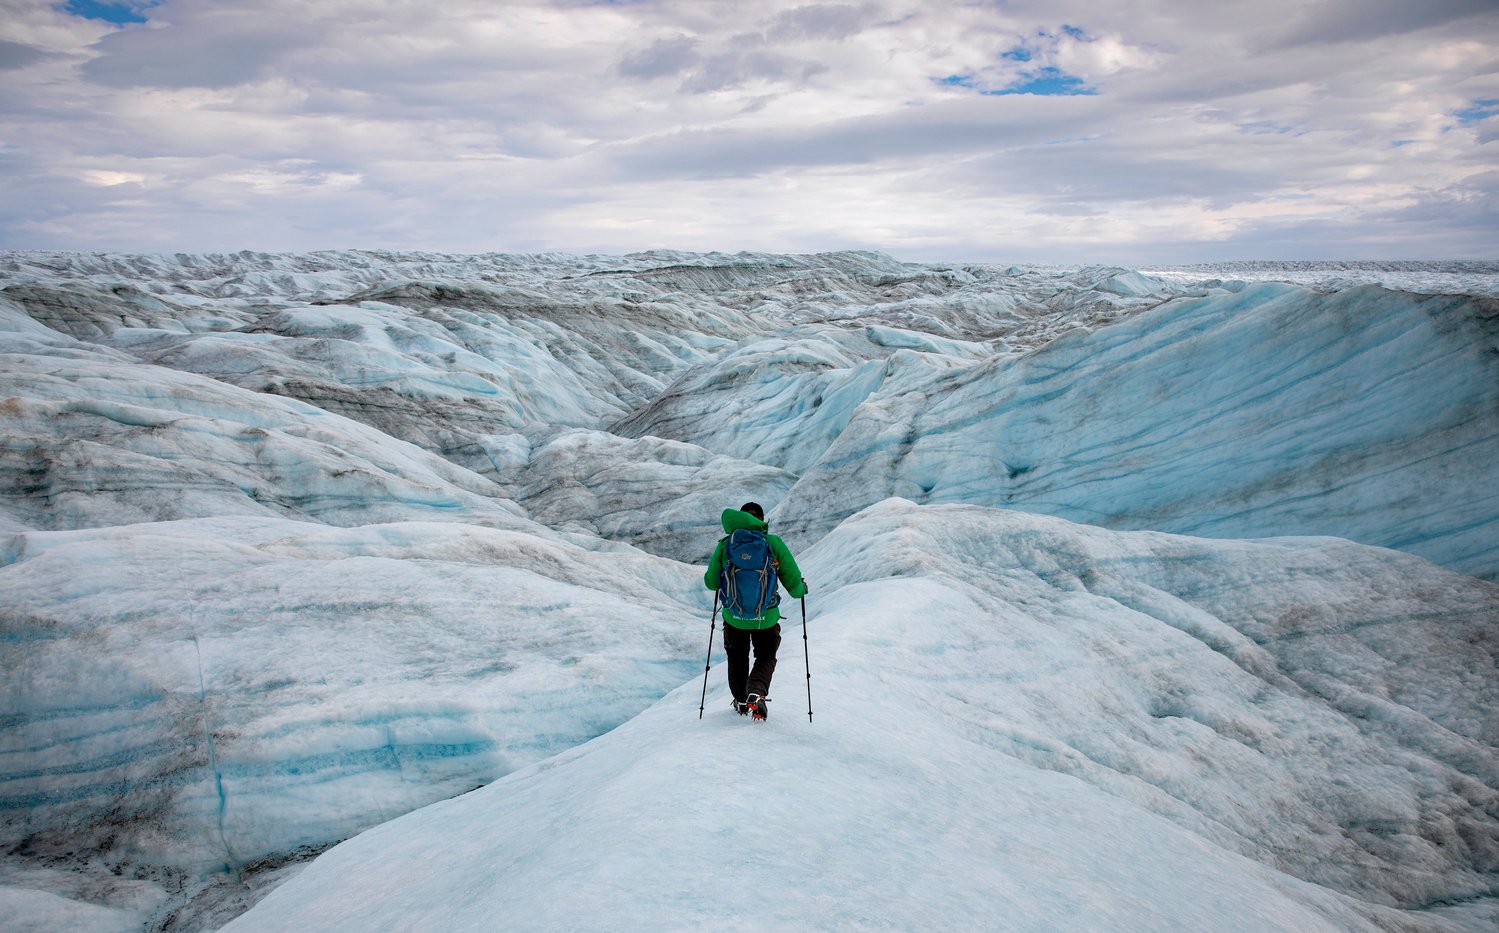 Adam Lyberth maneuvers his way around blue-and-white hills of  ice and snow on the Greenland ice sheet on Friday, August 13, 2021. An Inuit shaman, he says he’s walked on the ice more than 3,000 times, and that it changes every day. Lauren Petracca/Staff